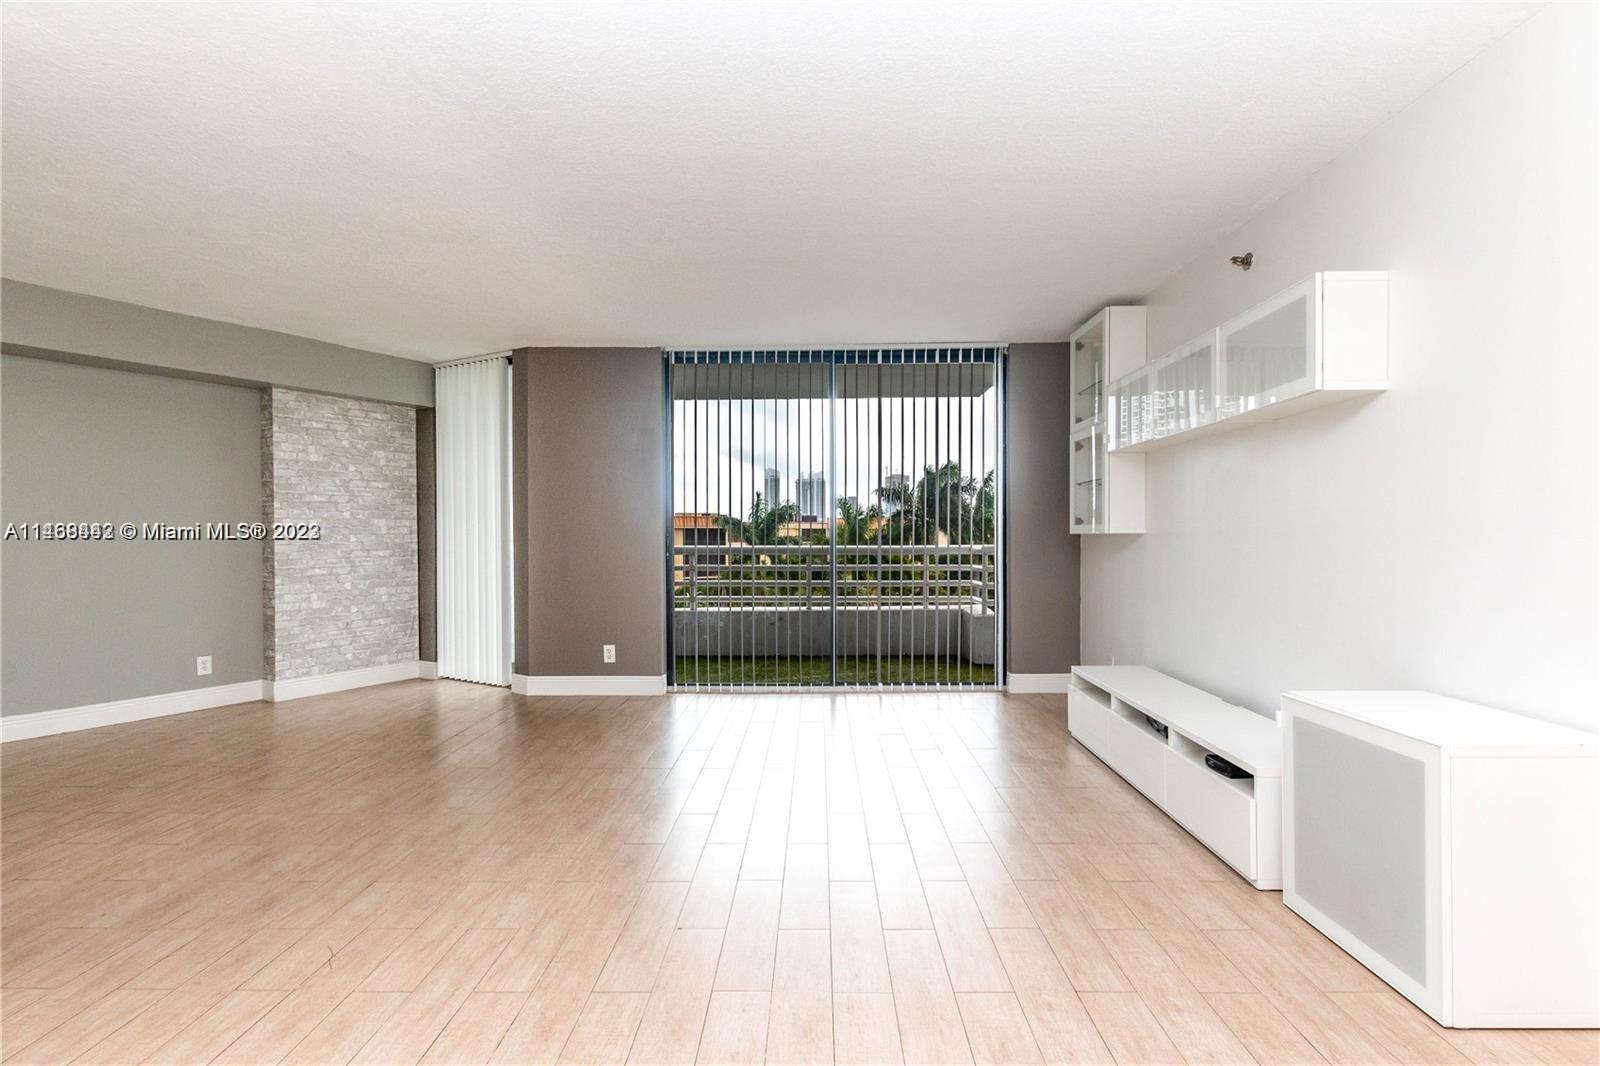 Beautiful unit in the heart of Aventura. Walking distance to Aventura Park and mall. Building features new lobby, two pools, gym, valet, elevators with fingerprint recognition. A+ schools and minutes to the beach.